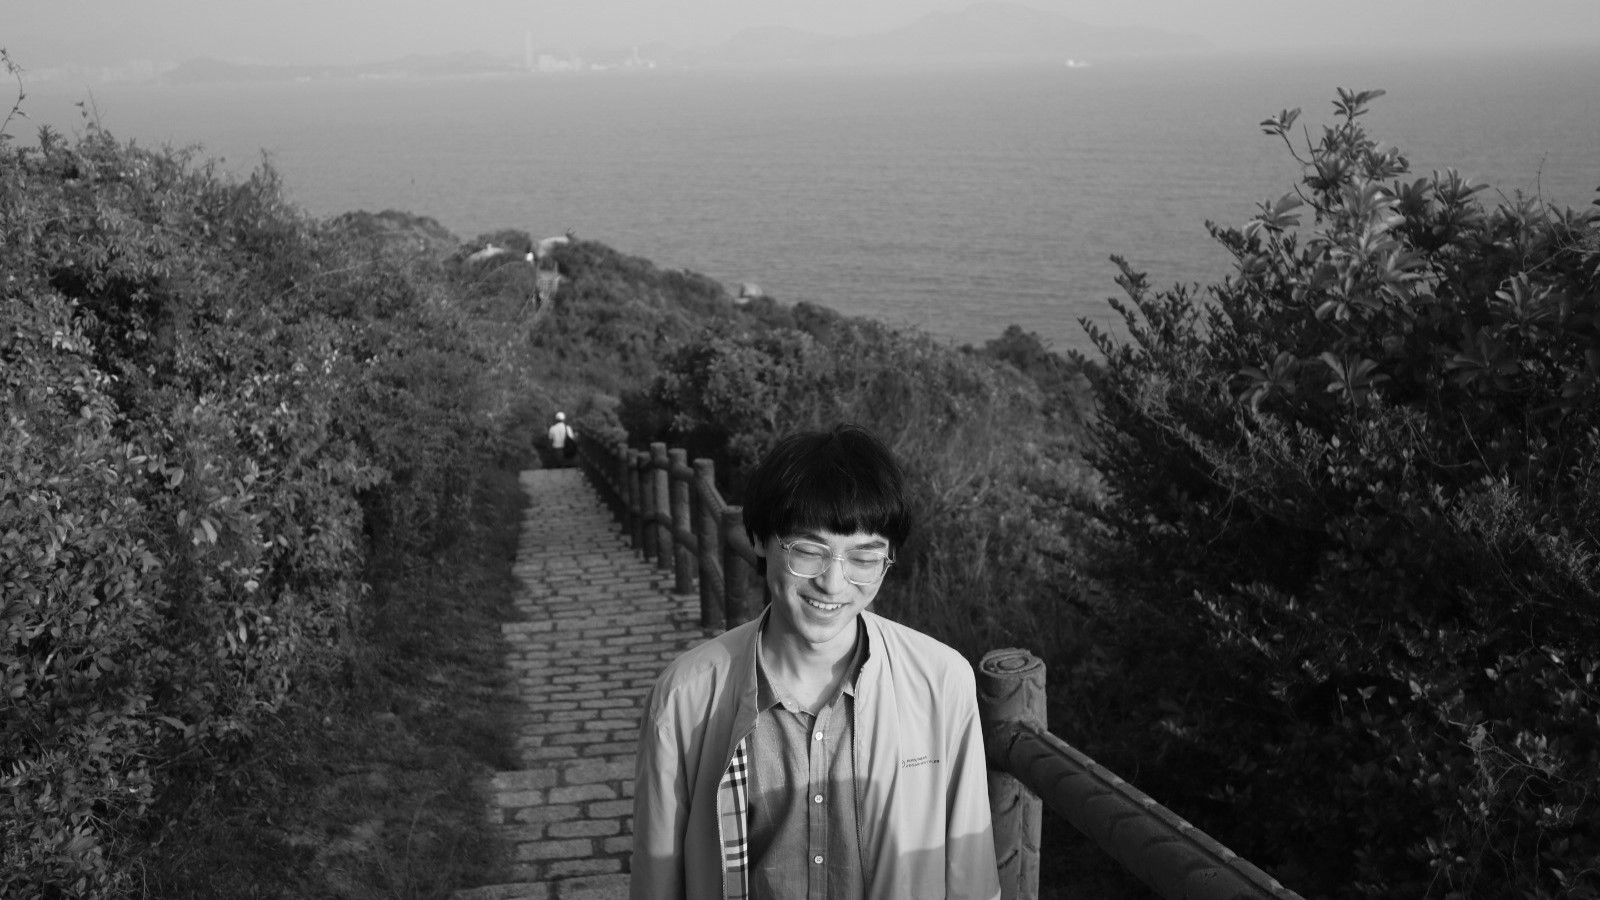 Yigang is standing on the island hillside stairs, smiling facing the sunset.